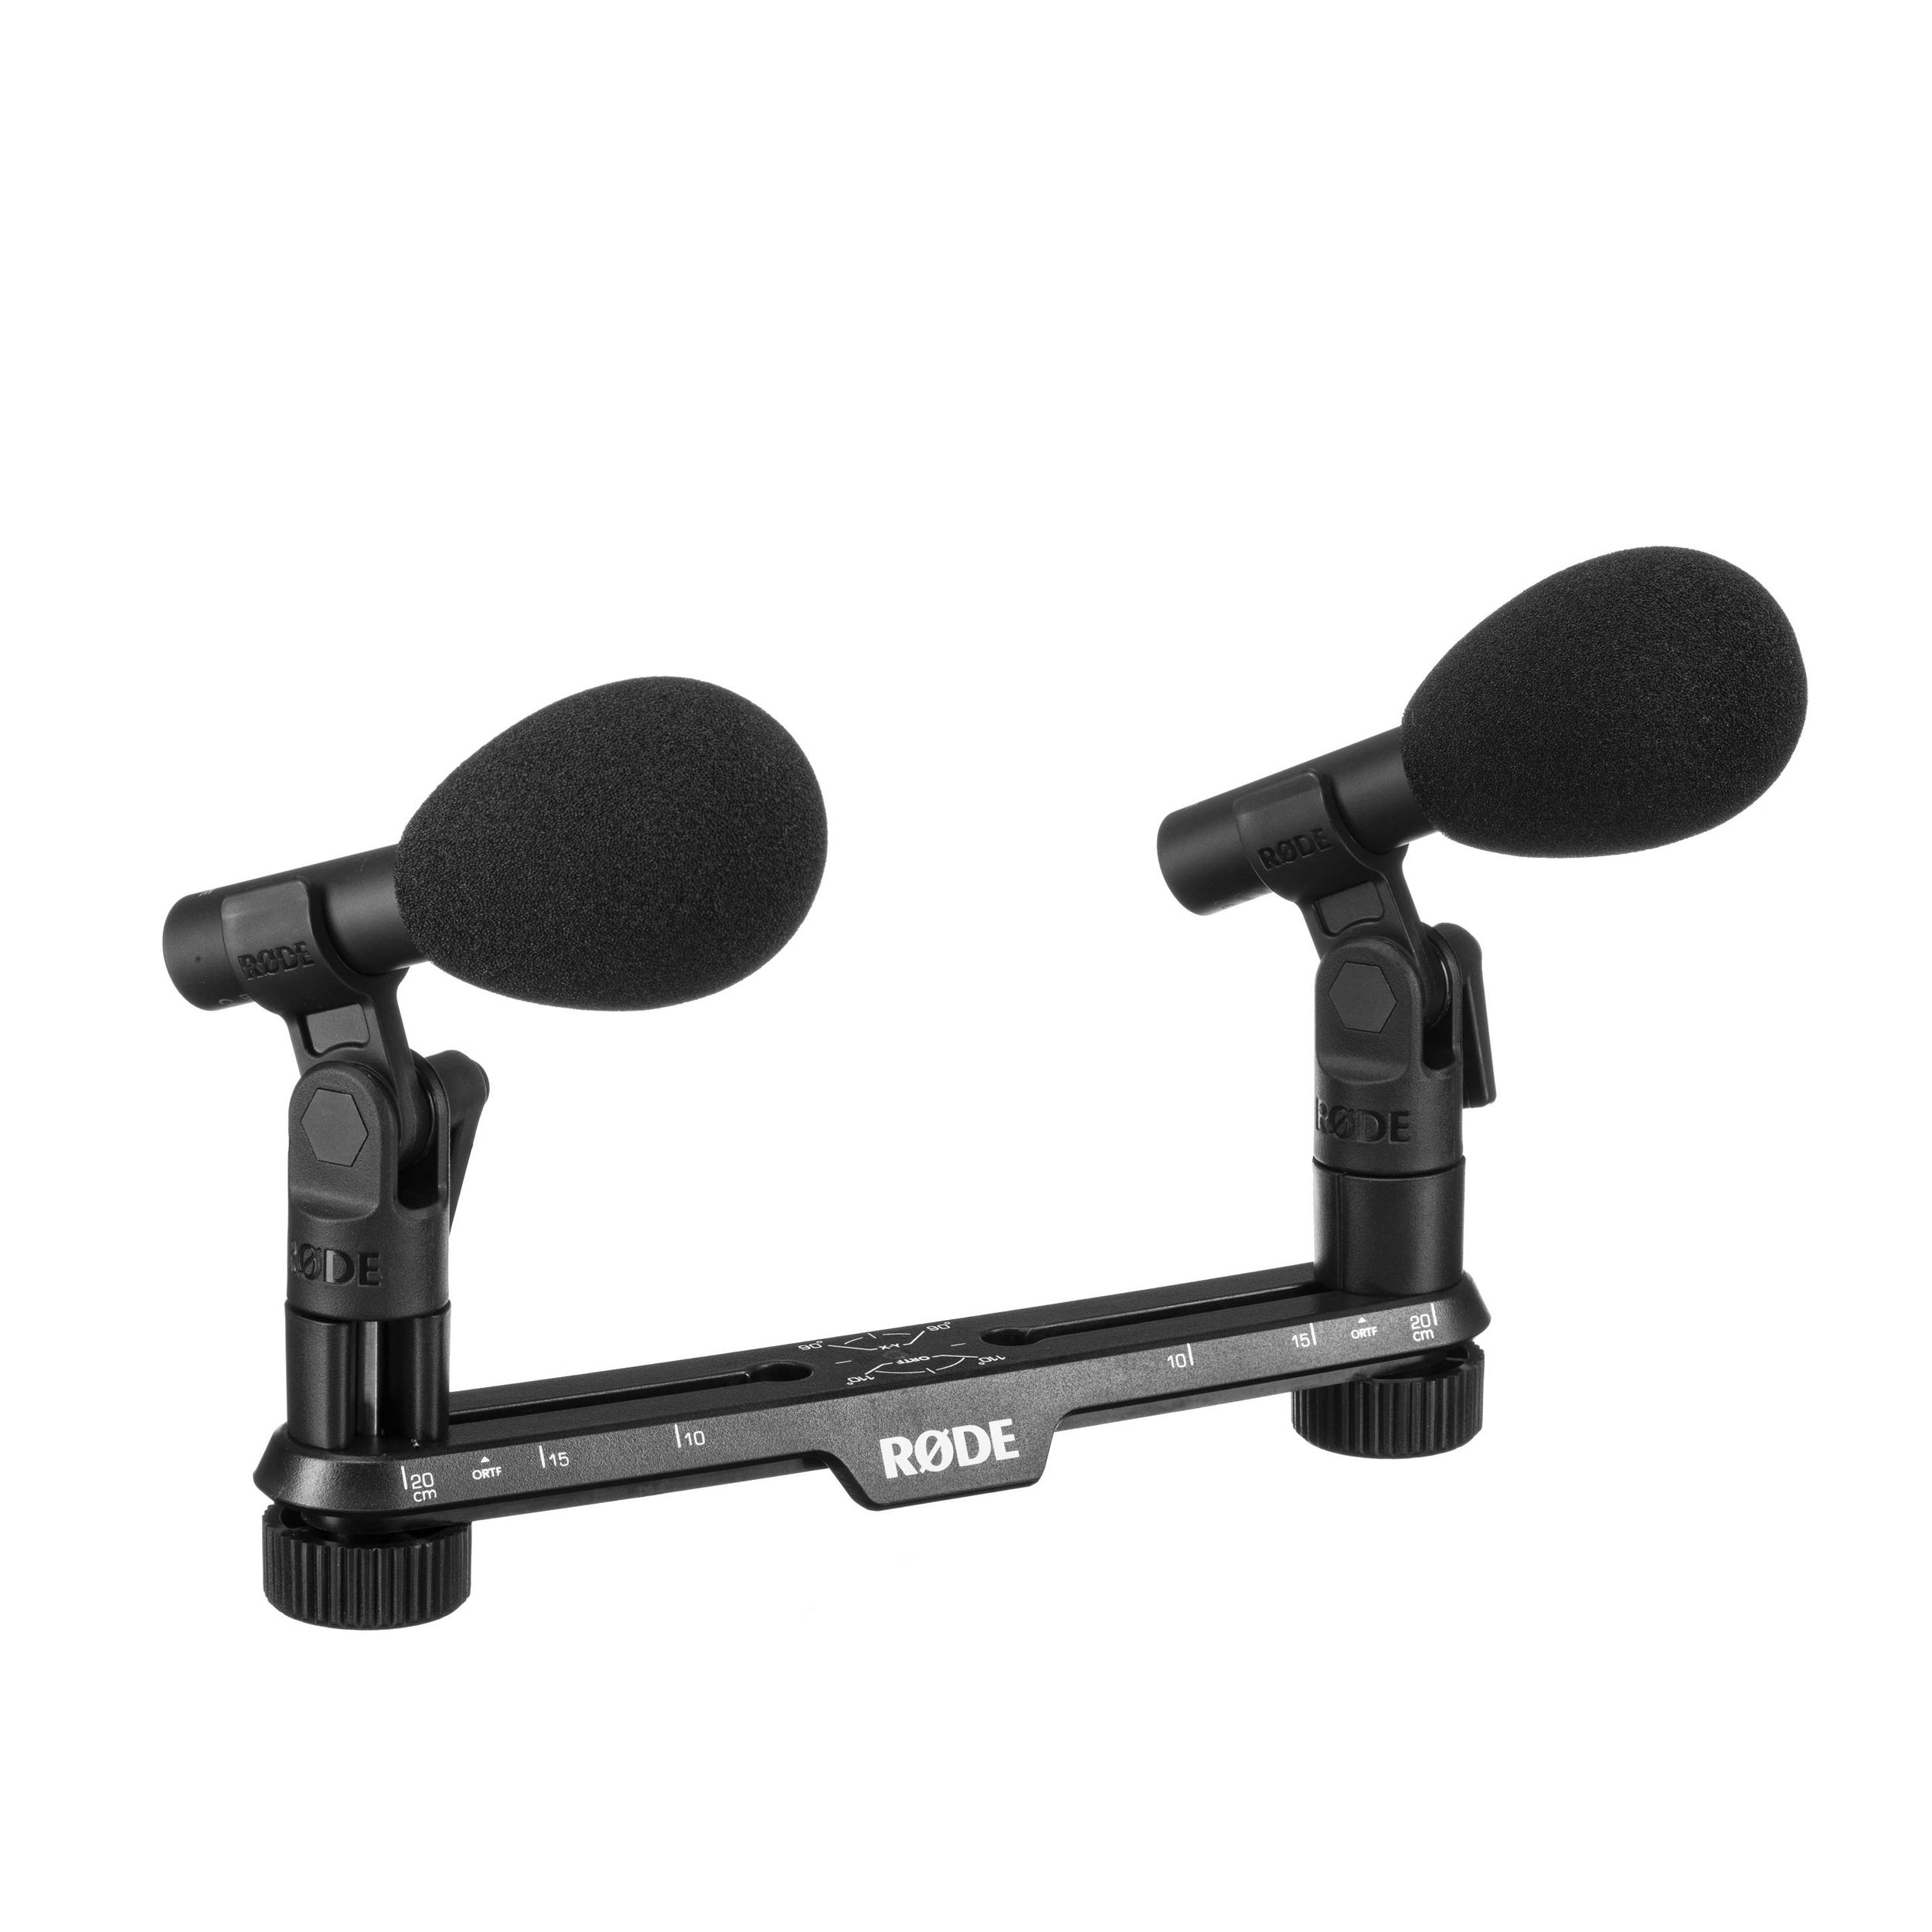 Rode TF-5 MP Cardioid Condenser Microphones with Stereo Mount (Black, Matched Pair)